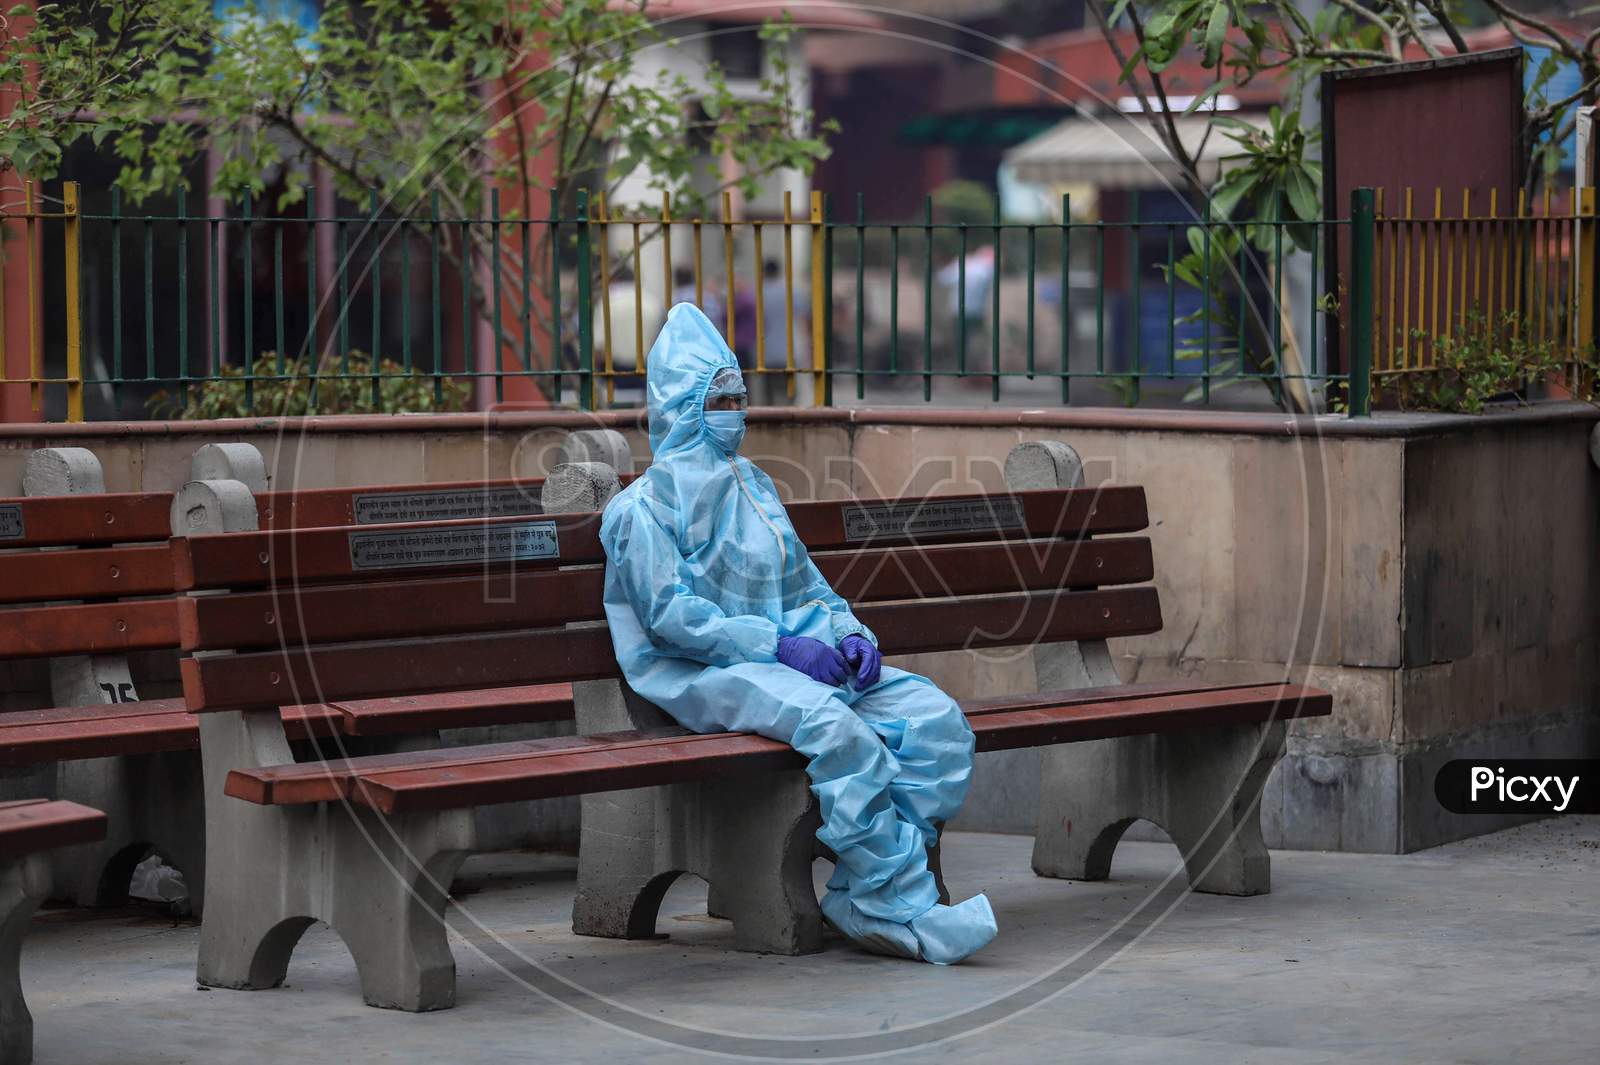 A Relative Of The Deceased Covid-19 patient Wears Hazmat Suit to Perform The Last Rites At Nigambodh Ghat, On May 31, 2020 In New Delhi, India.